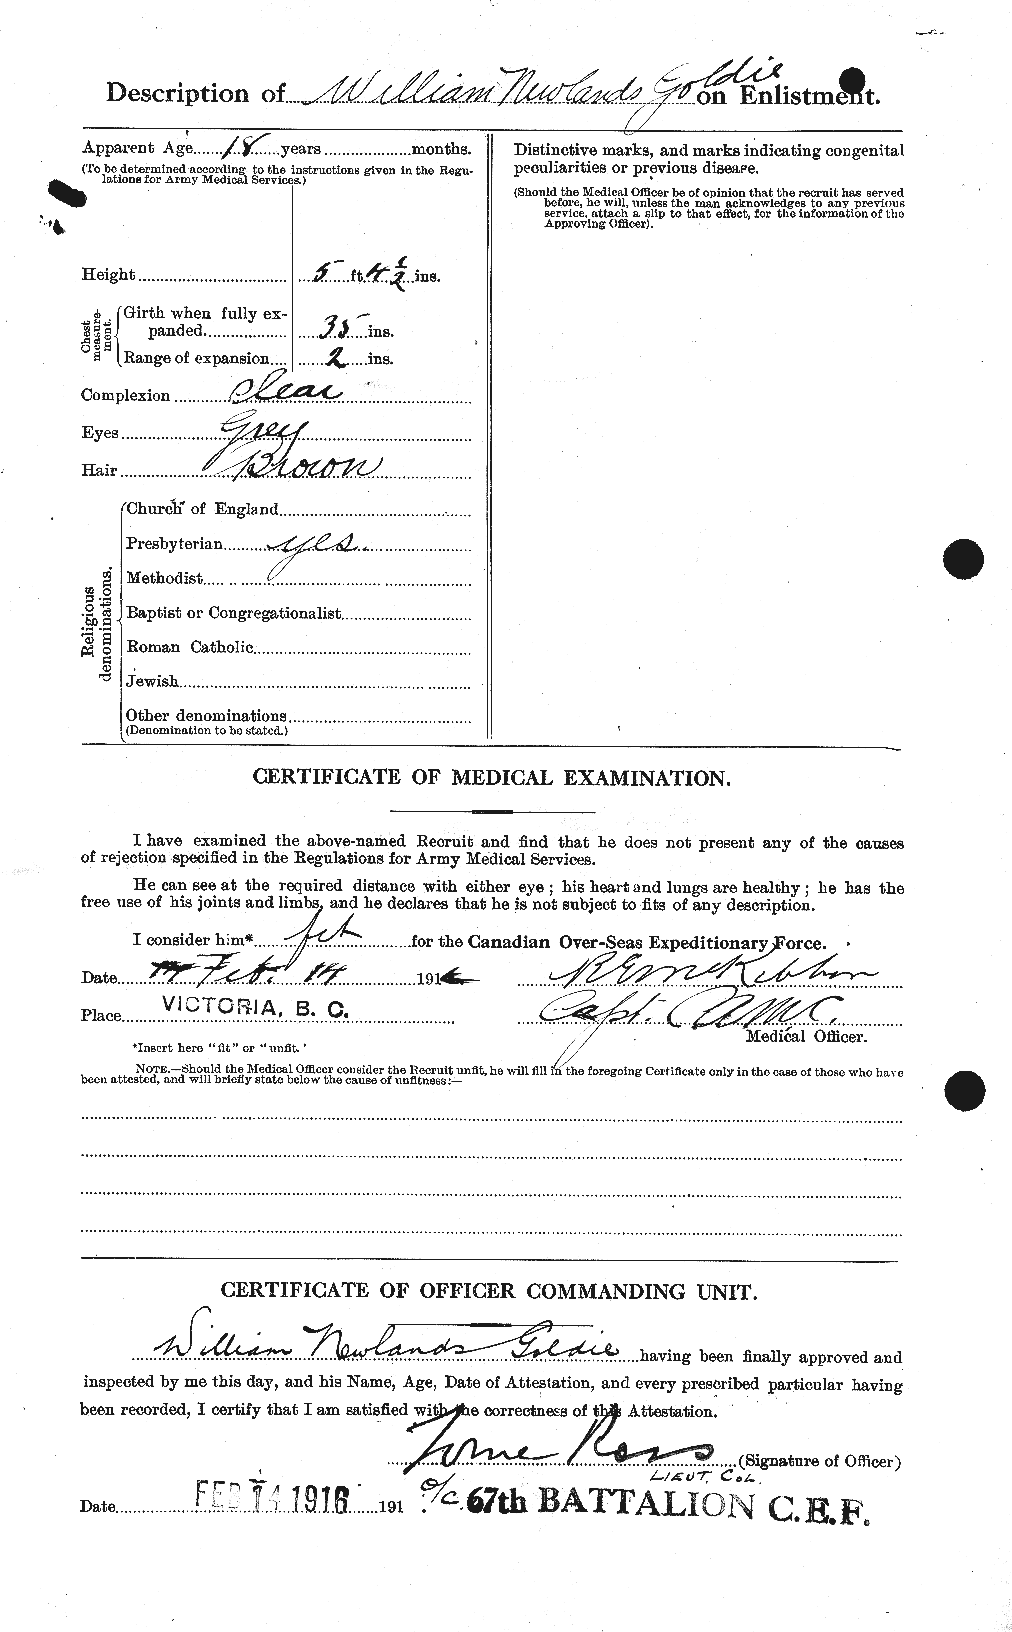 Personnel Records of the First World War - CEF 353957b